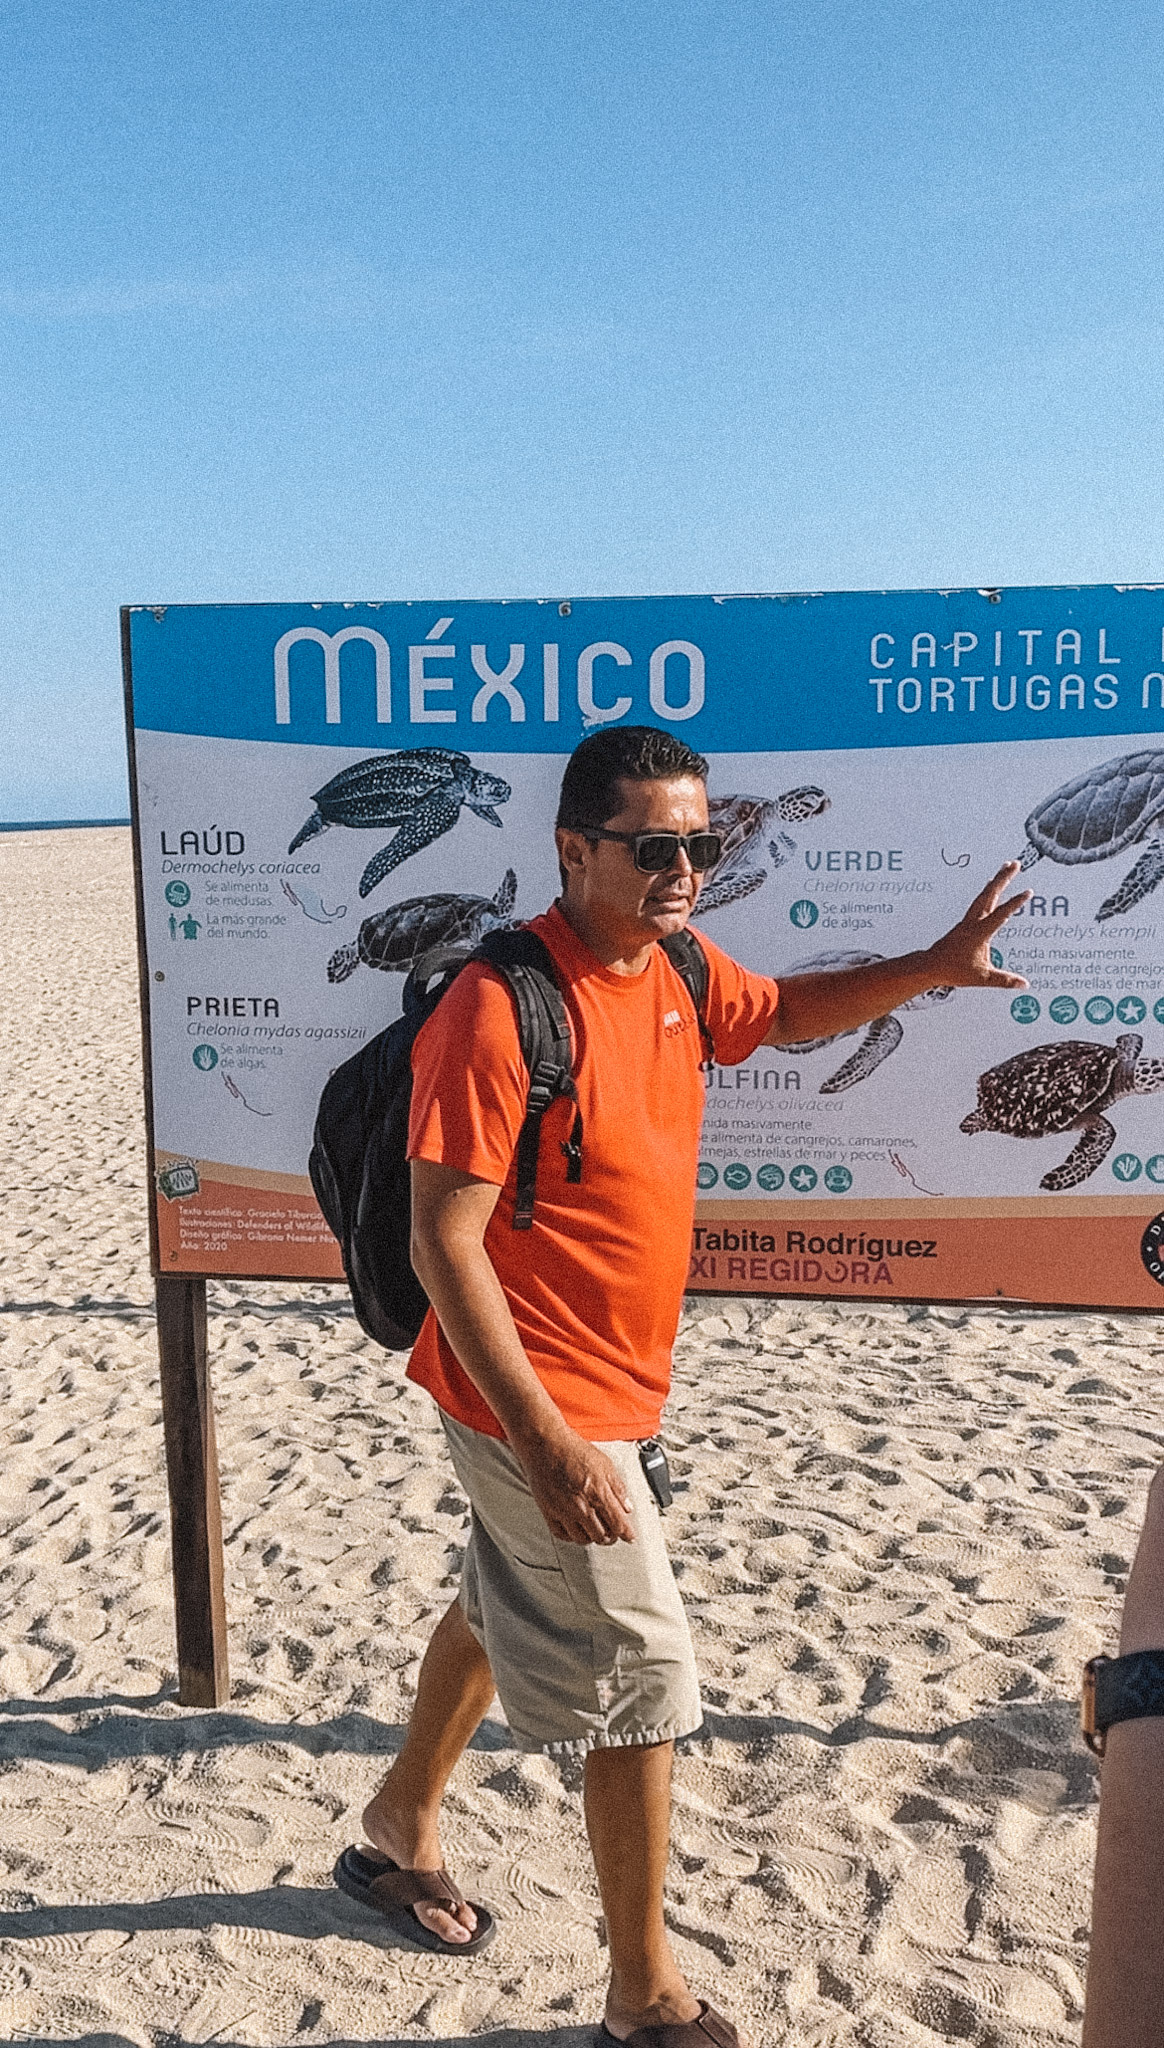 A guide standing in front of a turtle sign at the beach, teaching about turtle release experiences in Los Cabos